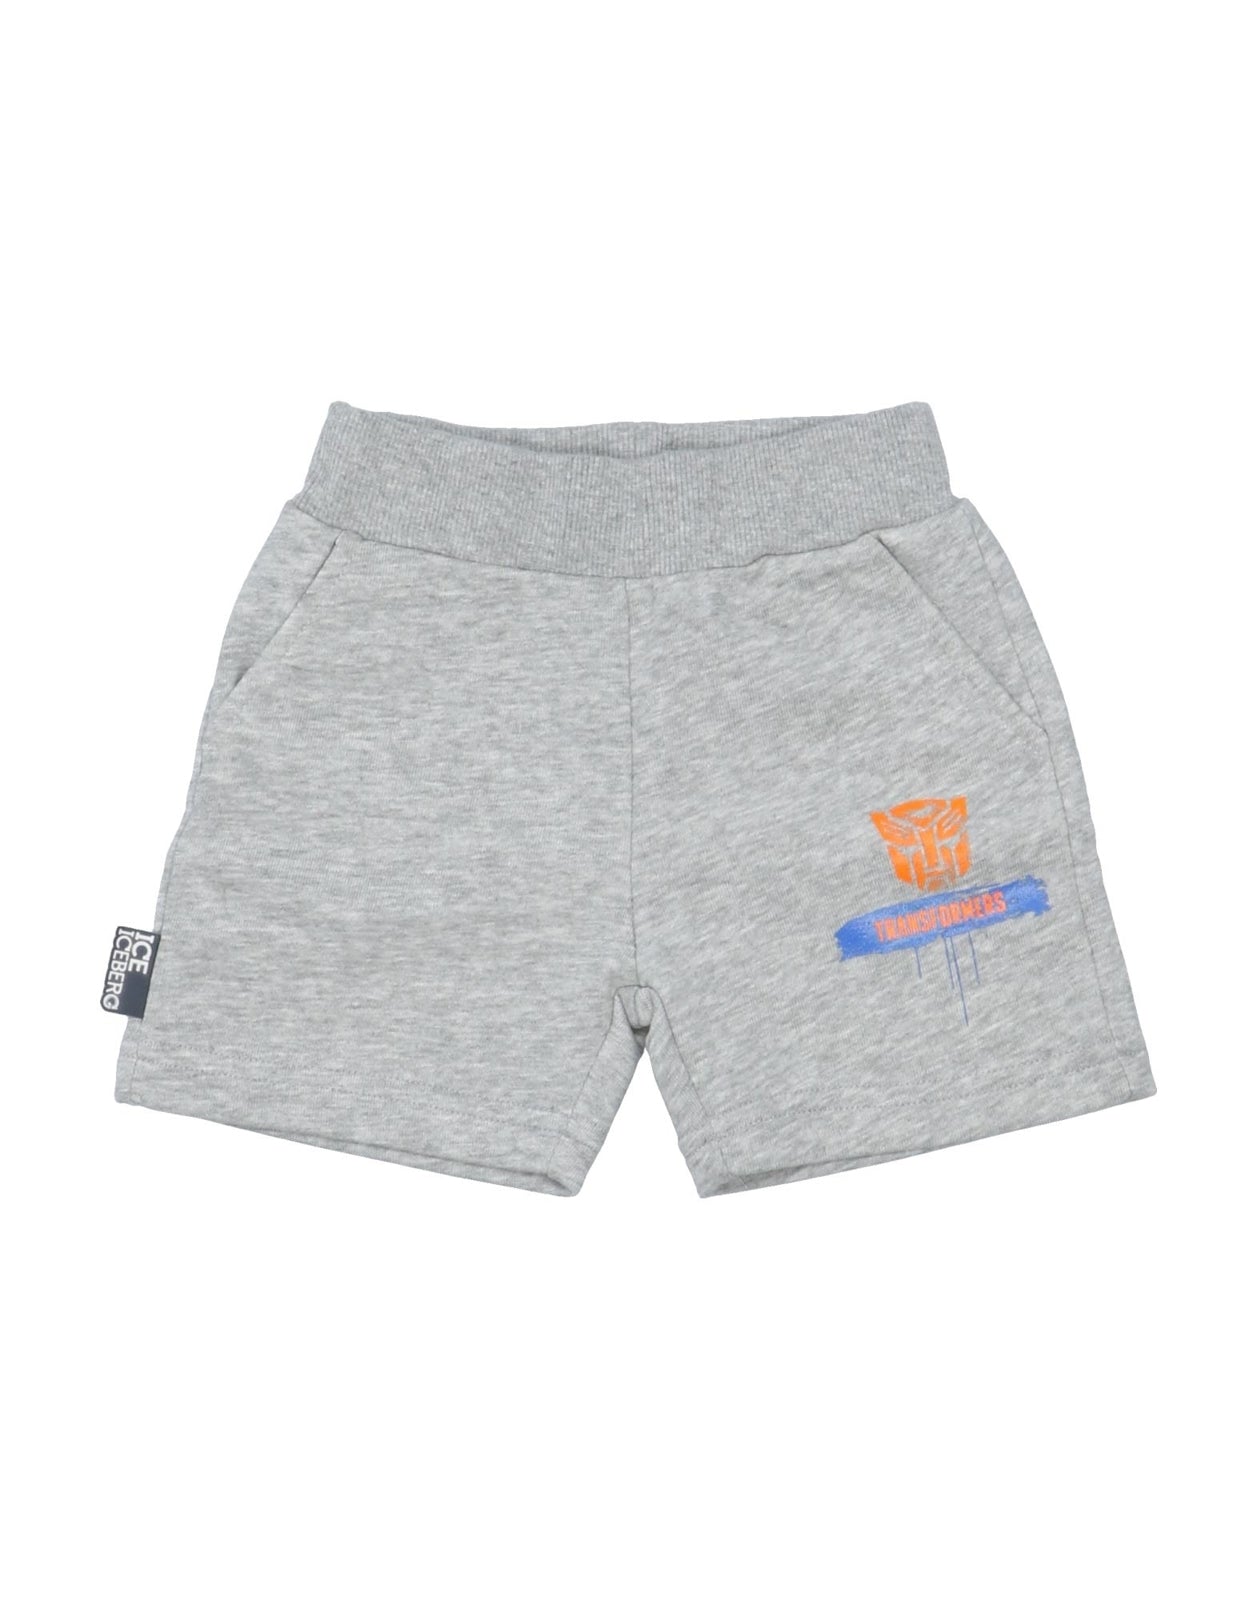 ICE ICEBERG x TRANSFORMERS Sweat Shorts Size 9M / 74CM Melange Made in Italy gallery main photo